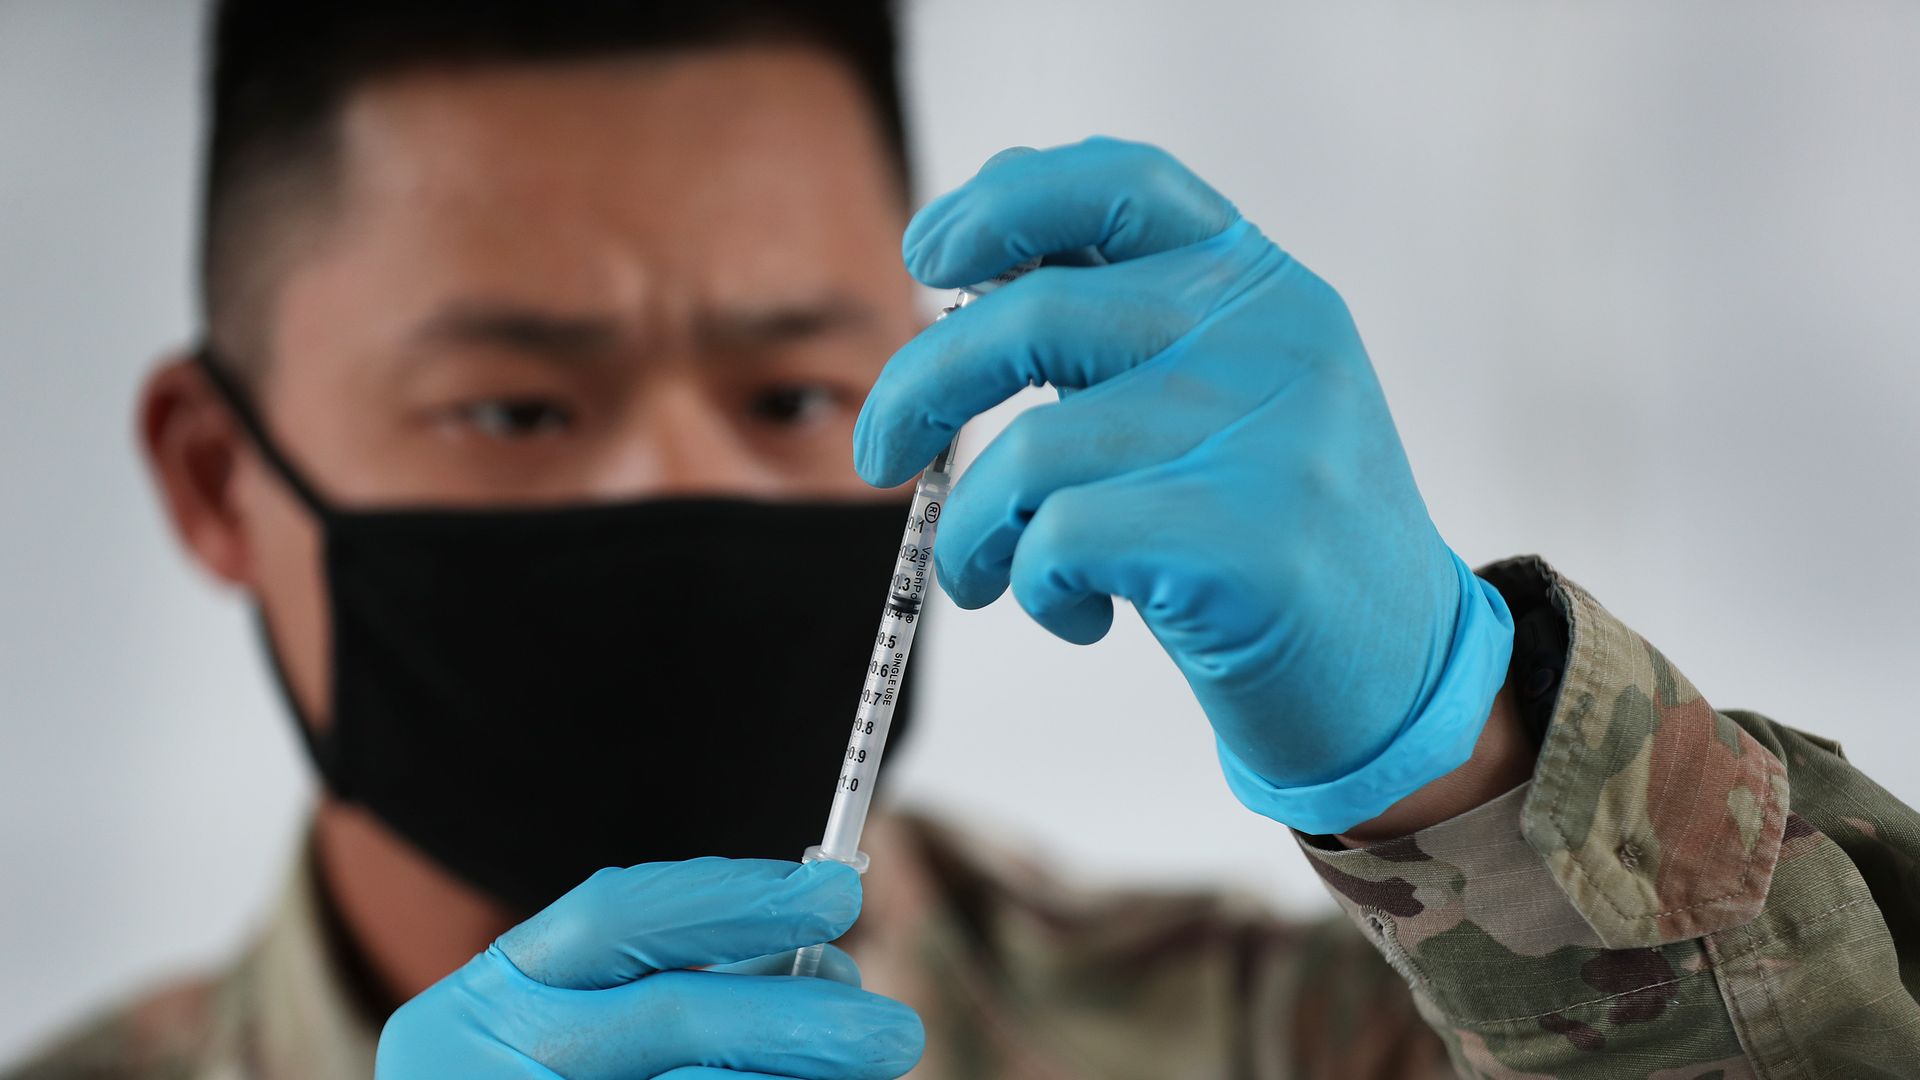  A U.S. Army soldier from the 2nd Armored Brigade Combat Team, 1st Infantry Division, prepares Pfizer COVID-19 vaccines to inoculate people at the Miami Dade College North Campus 